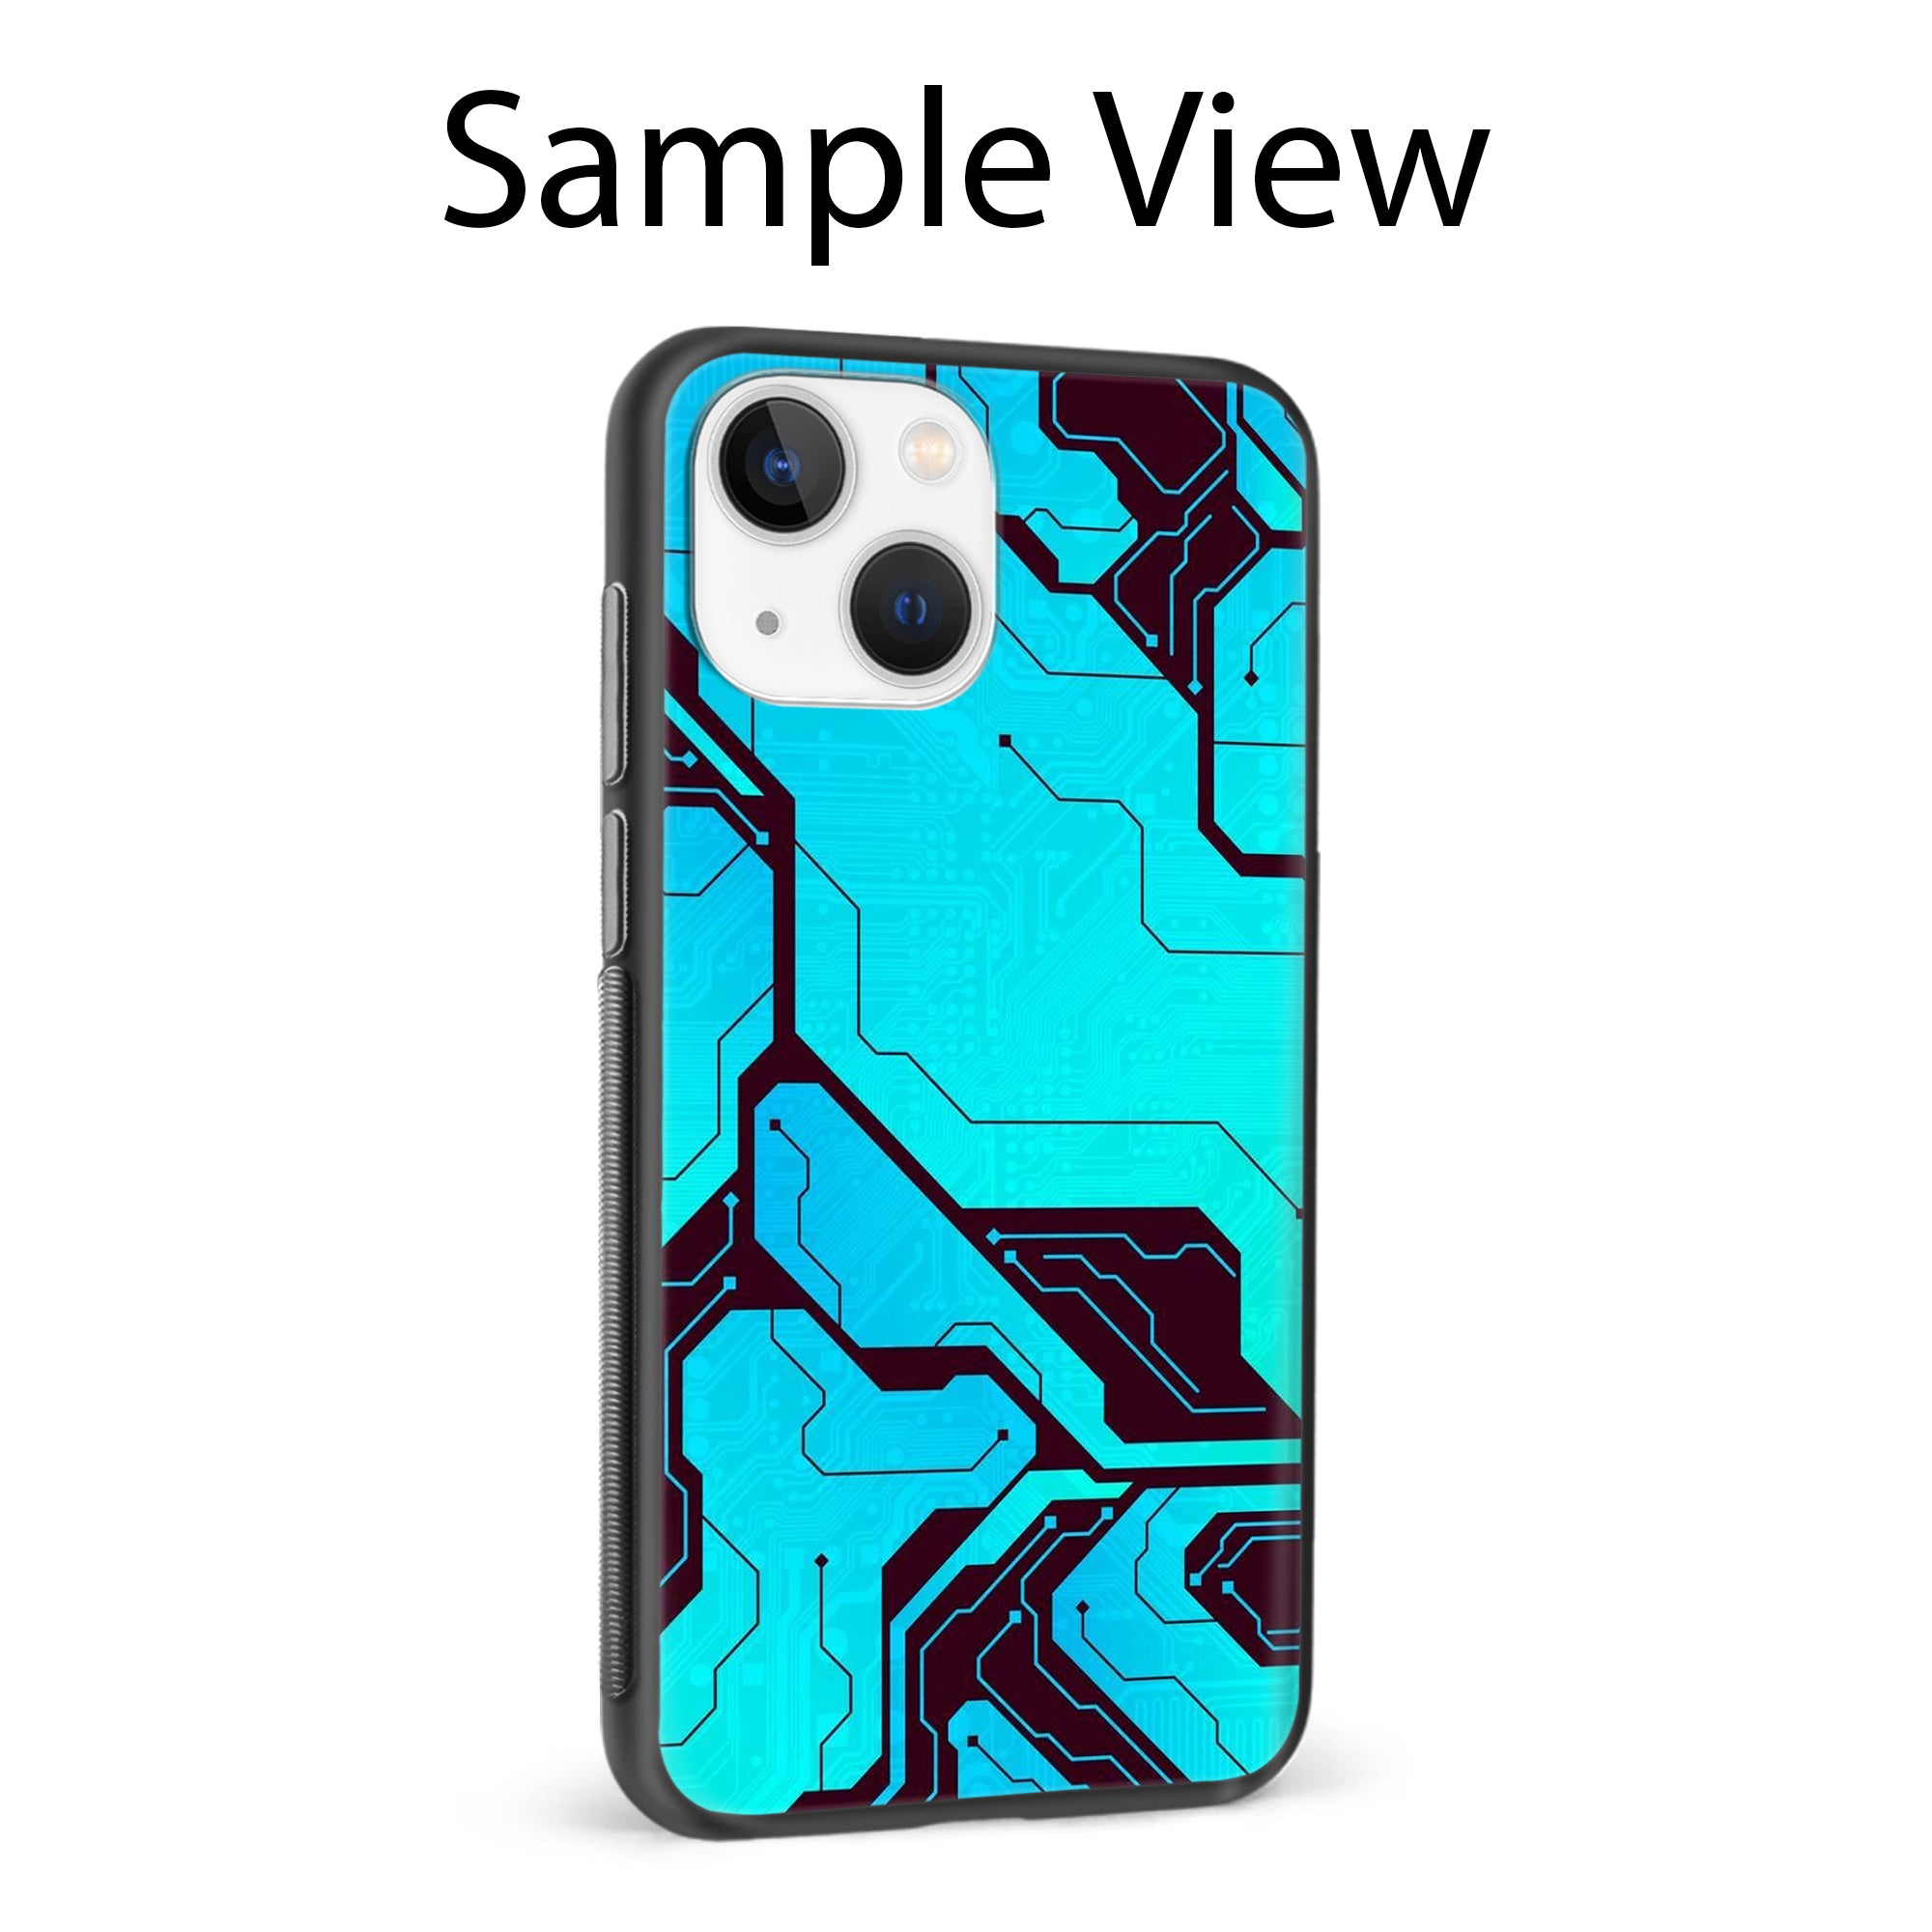 Buy Futuristic Line Metal-Silicon Back Mobile Phone Case/Cover For Samsung Galaxy A50 / A50s / A30s Online